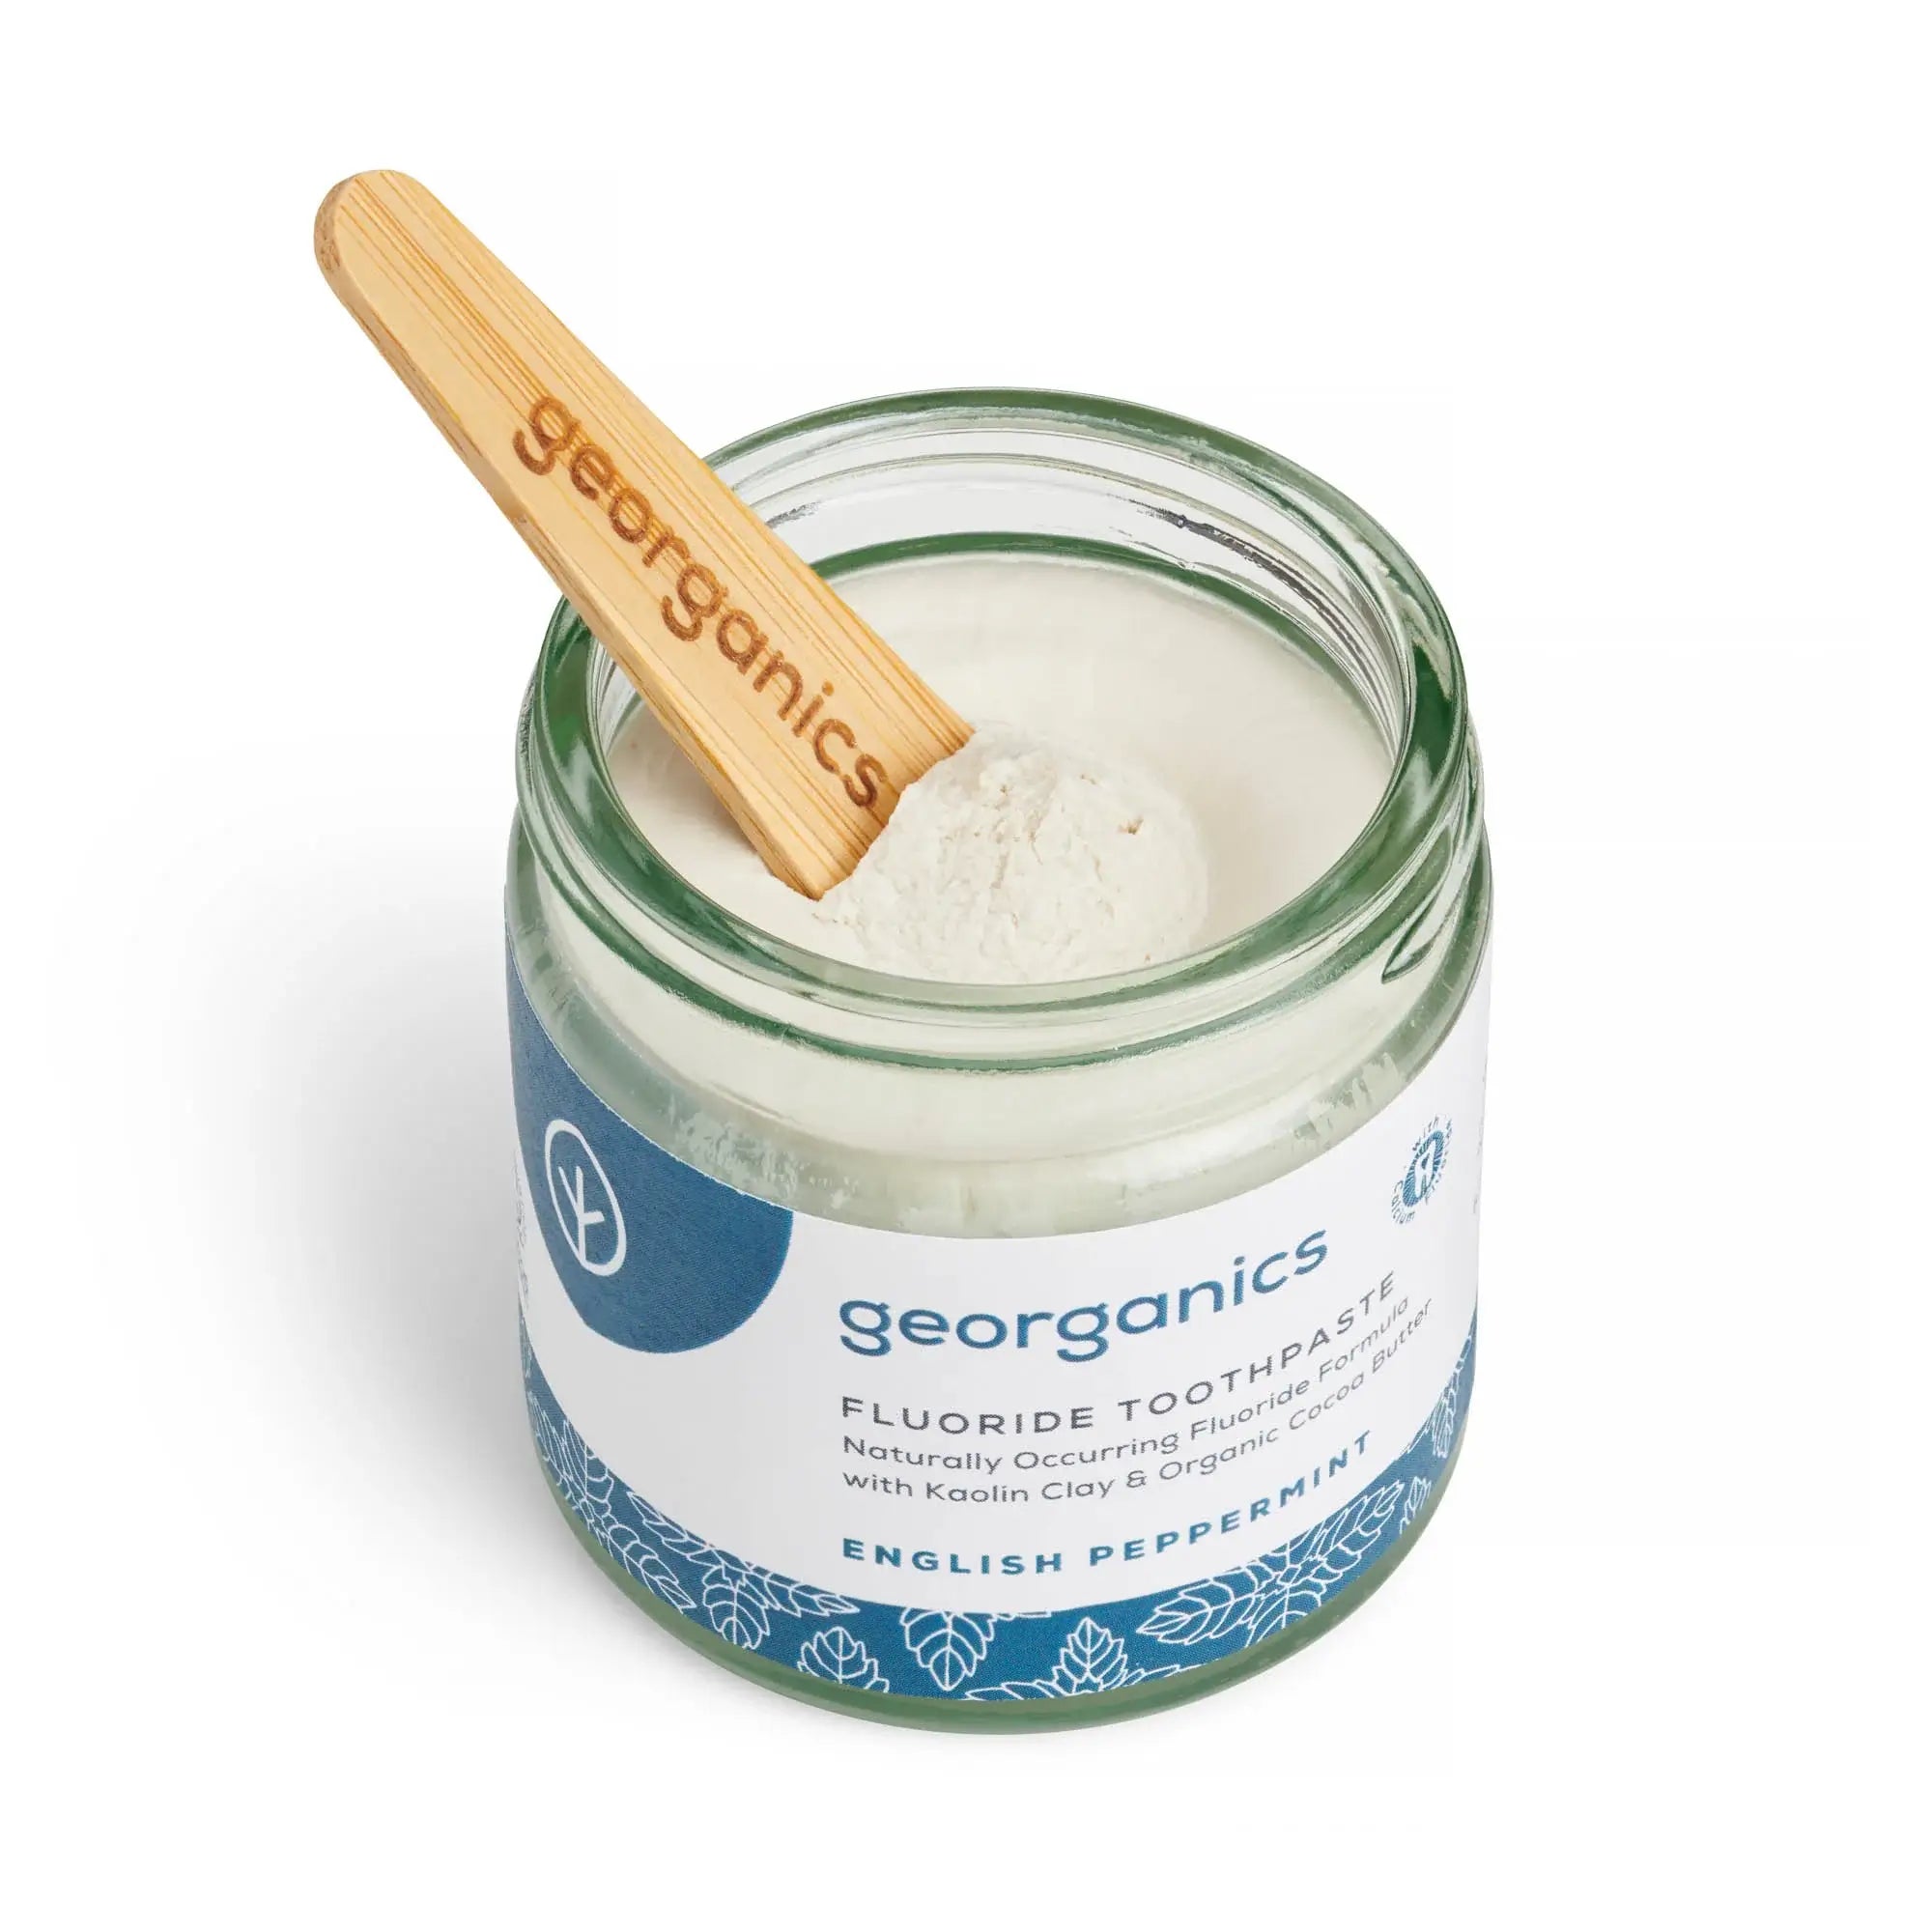 Mineral Toothpaste - English Peppermint - The Plastic Free Co.